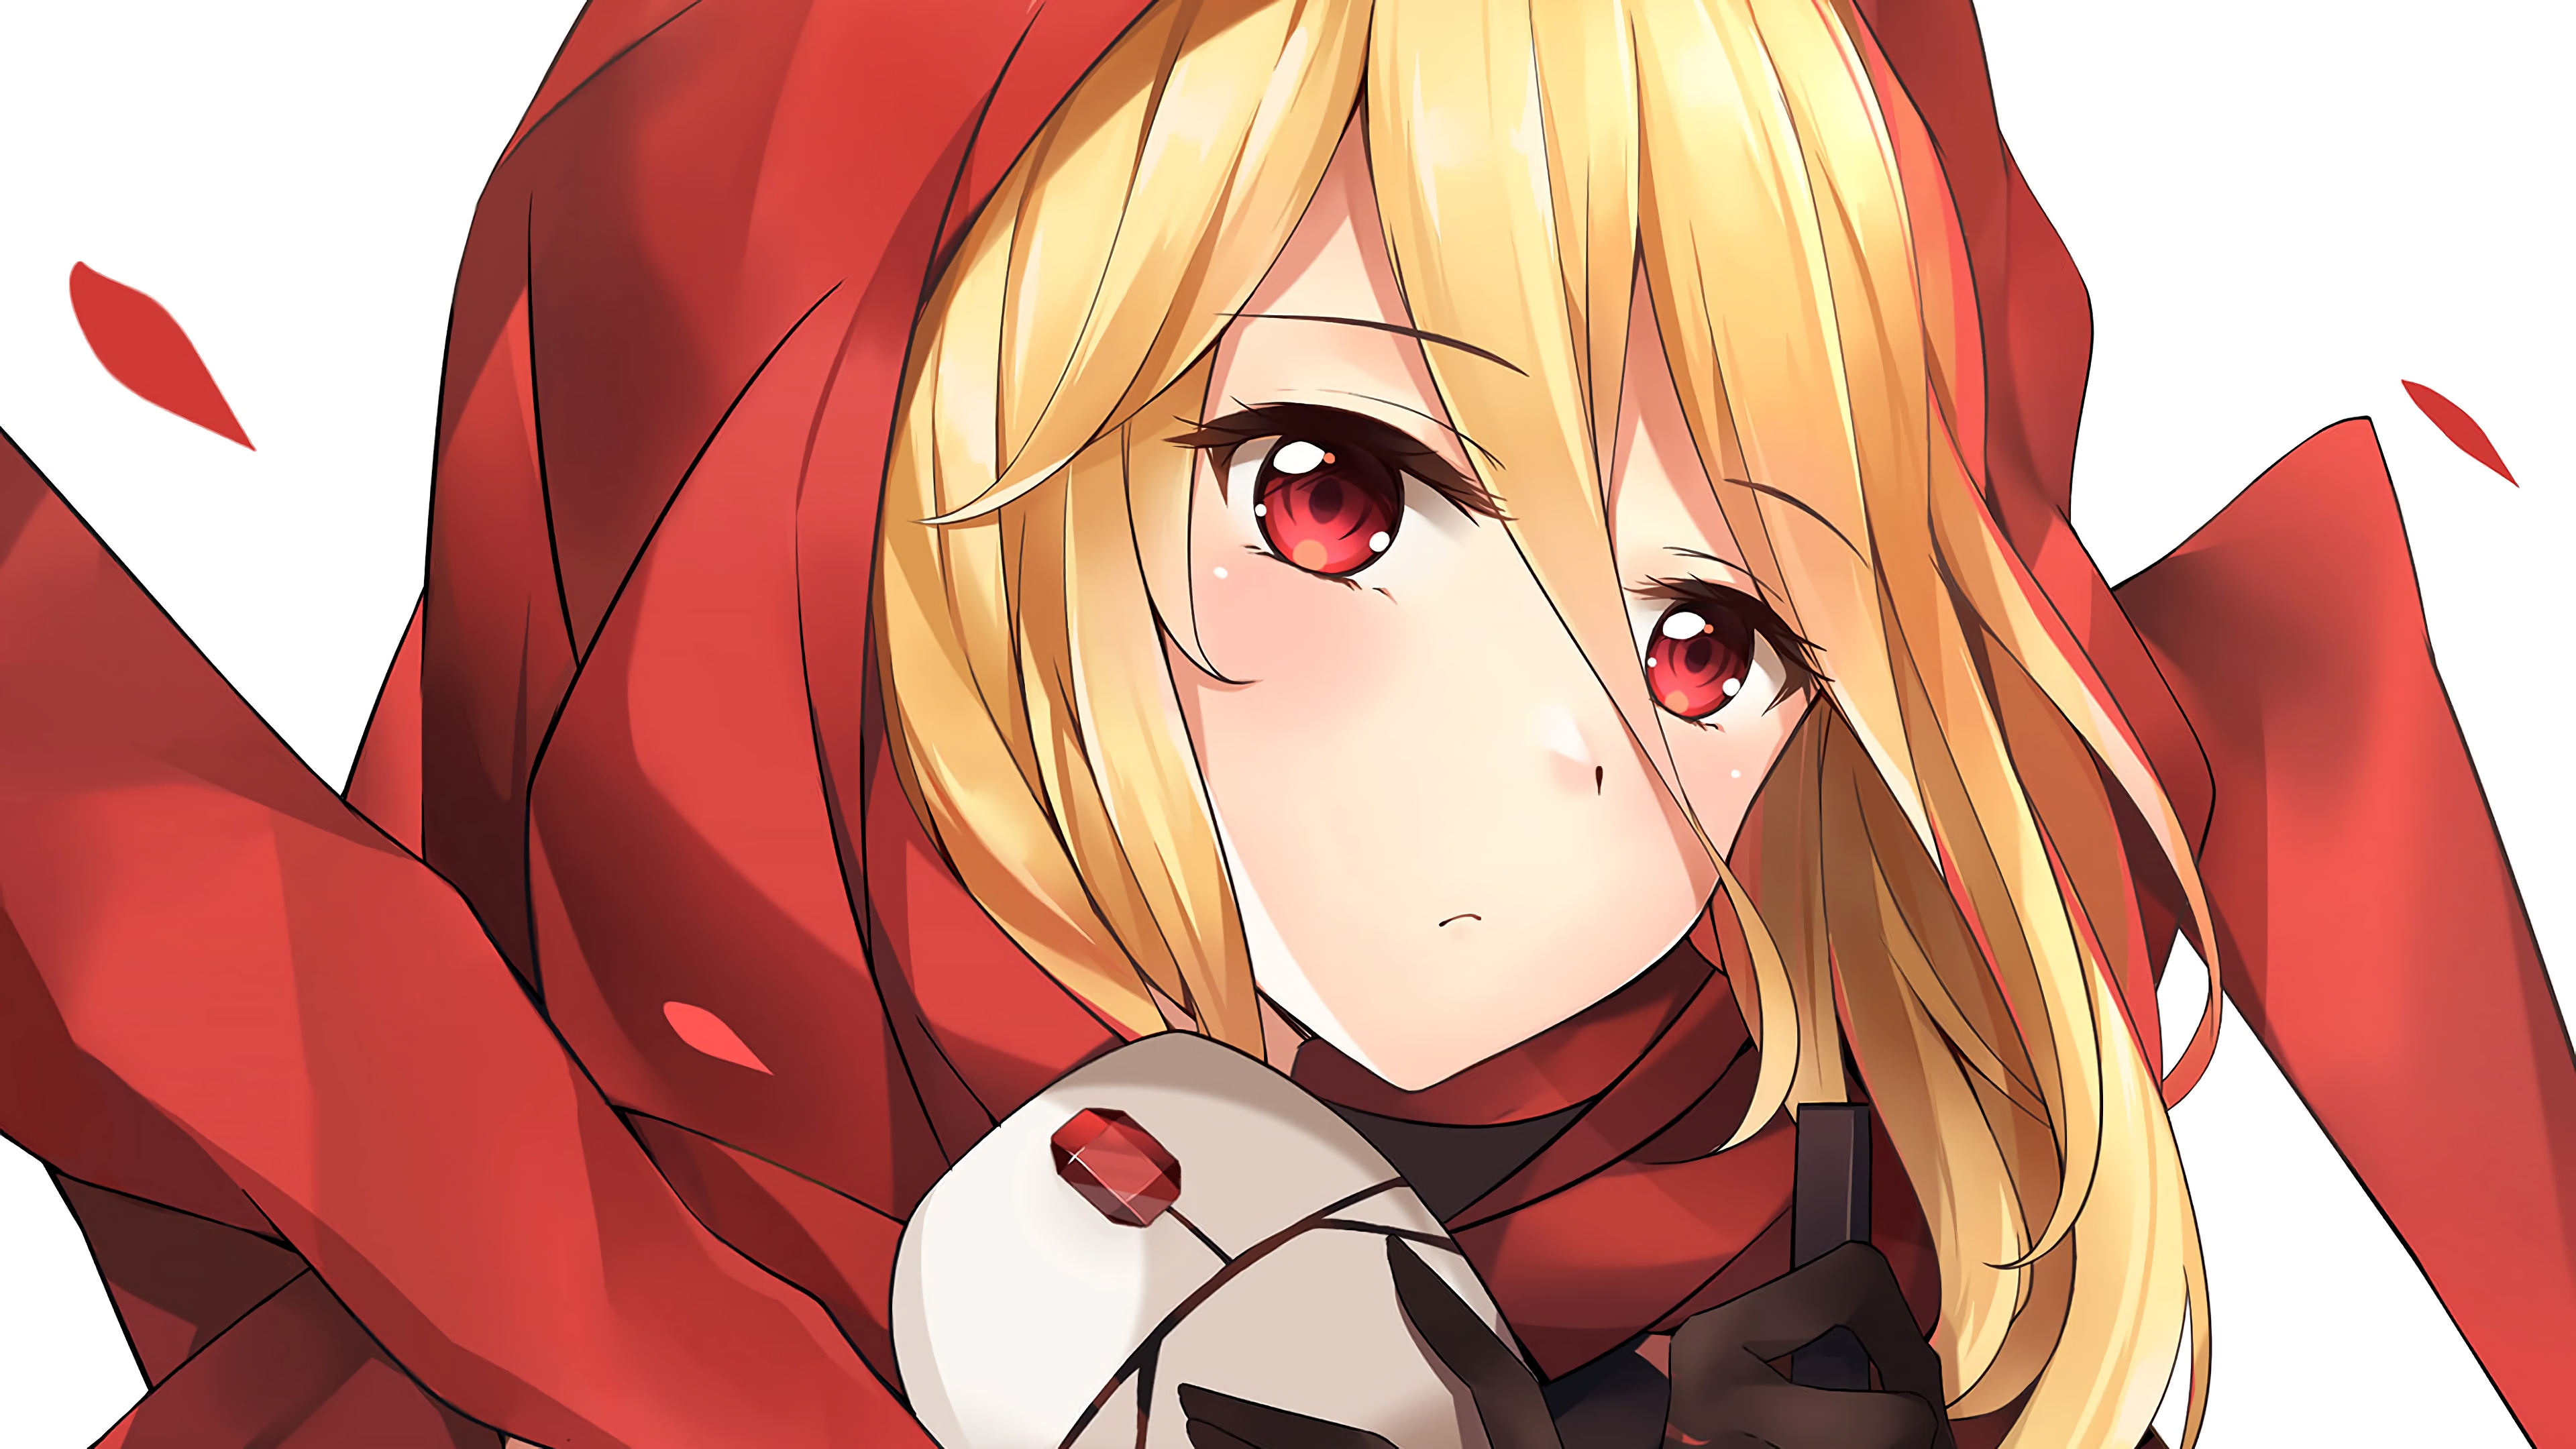 Blonde Evileye Overlord Girl Overlord Anime Red Eyes 3840x2160